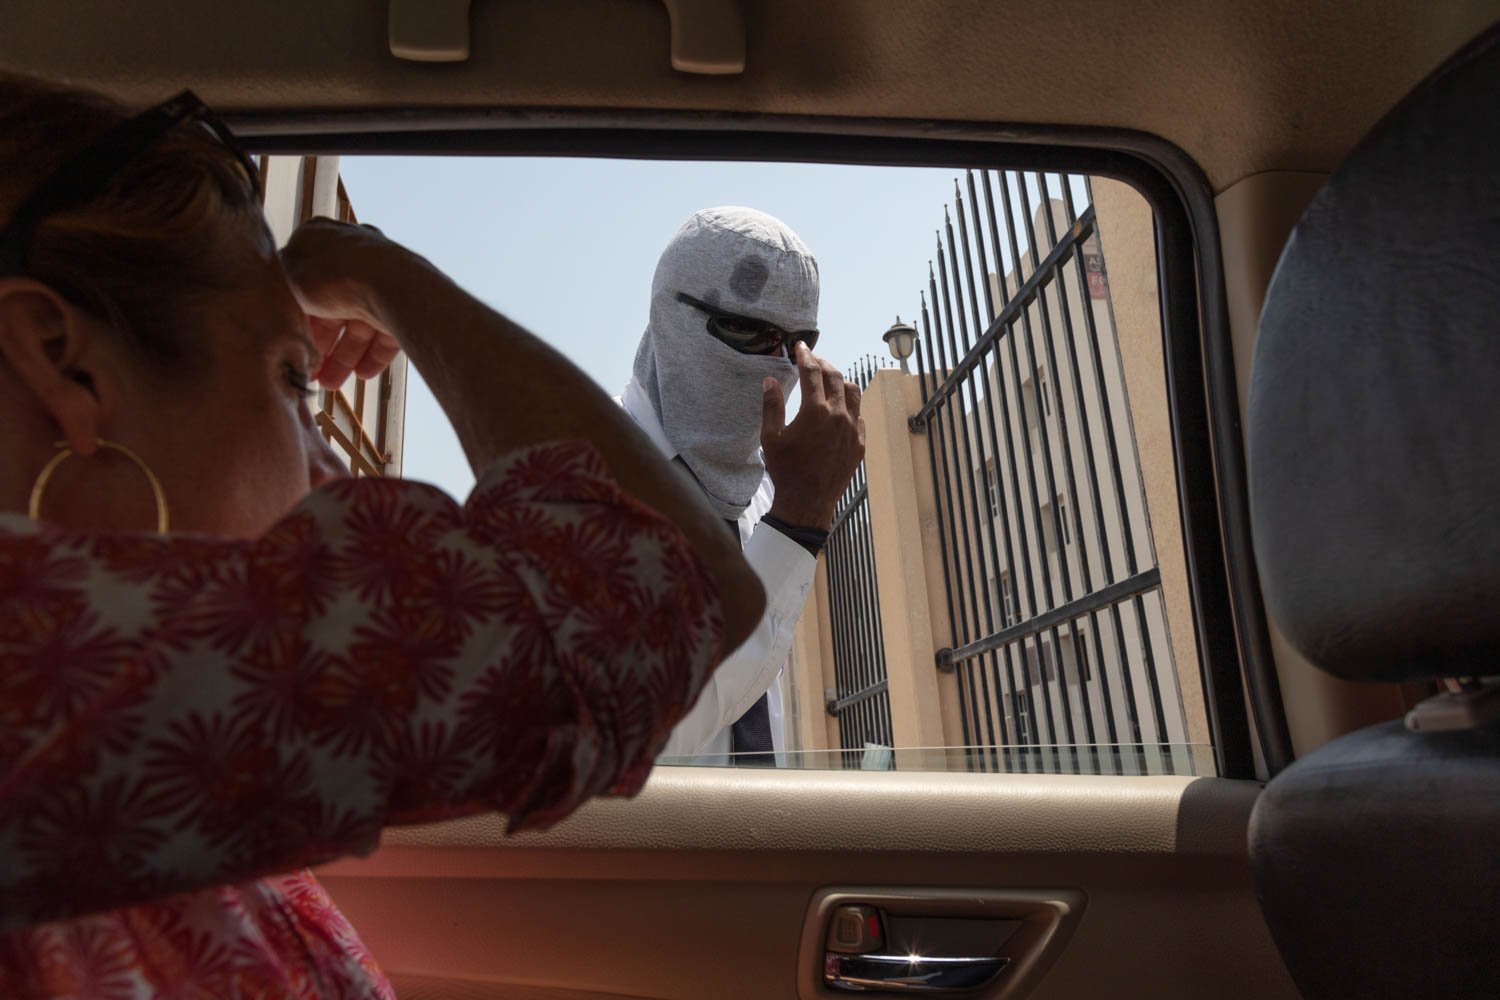  A private security guard looks into a car window in Lusail City, Qatar on August 18, 2022. 